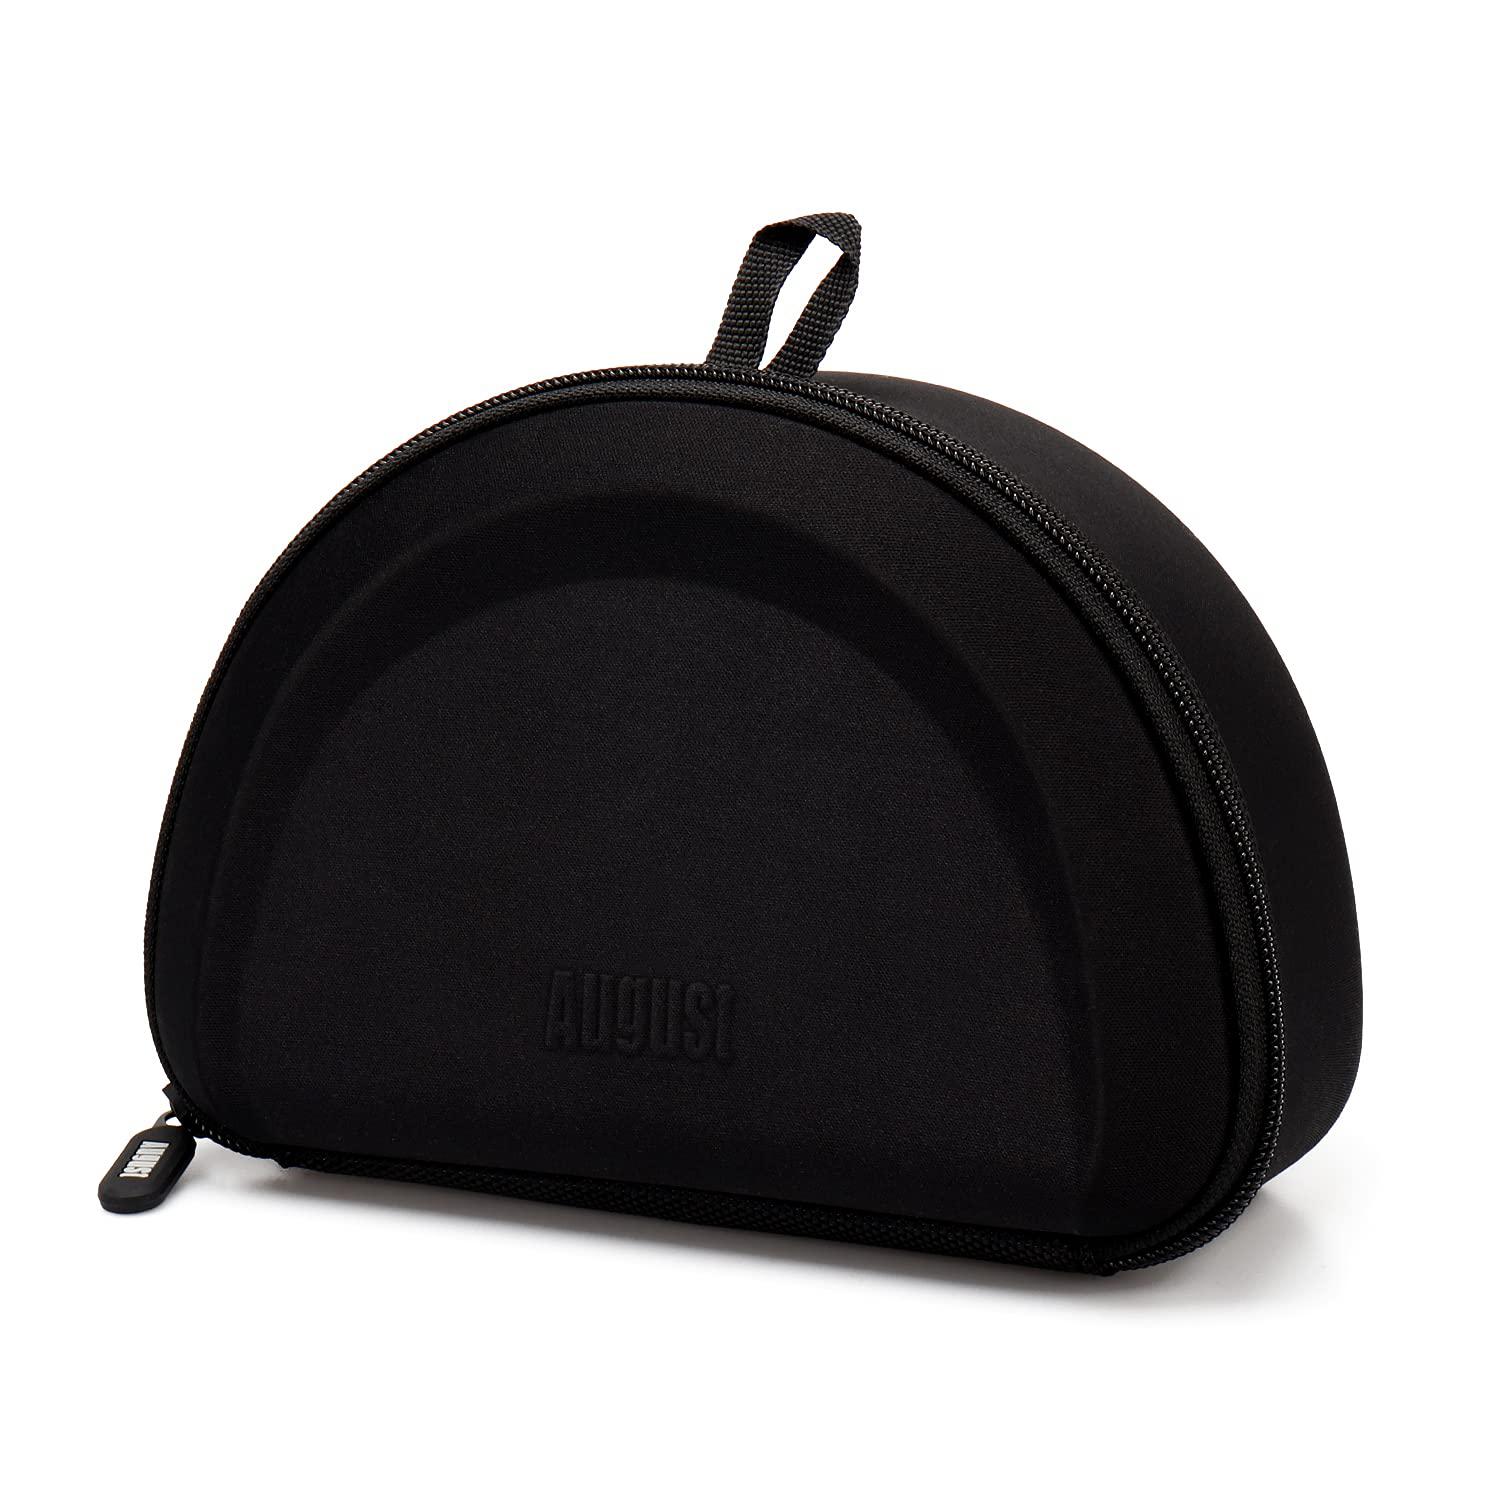 august headphone case for august ep650 / ep640 and more foldable headphones of other brands, storage bag travel carrying case